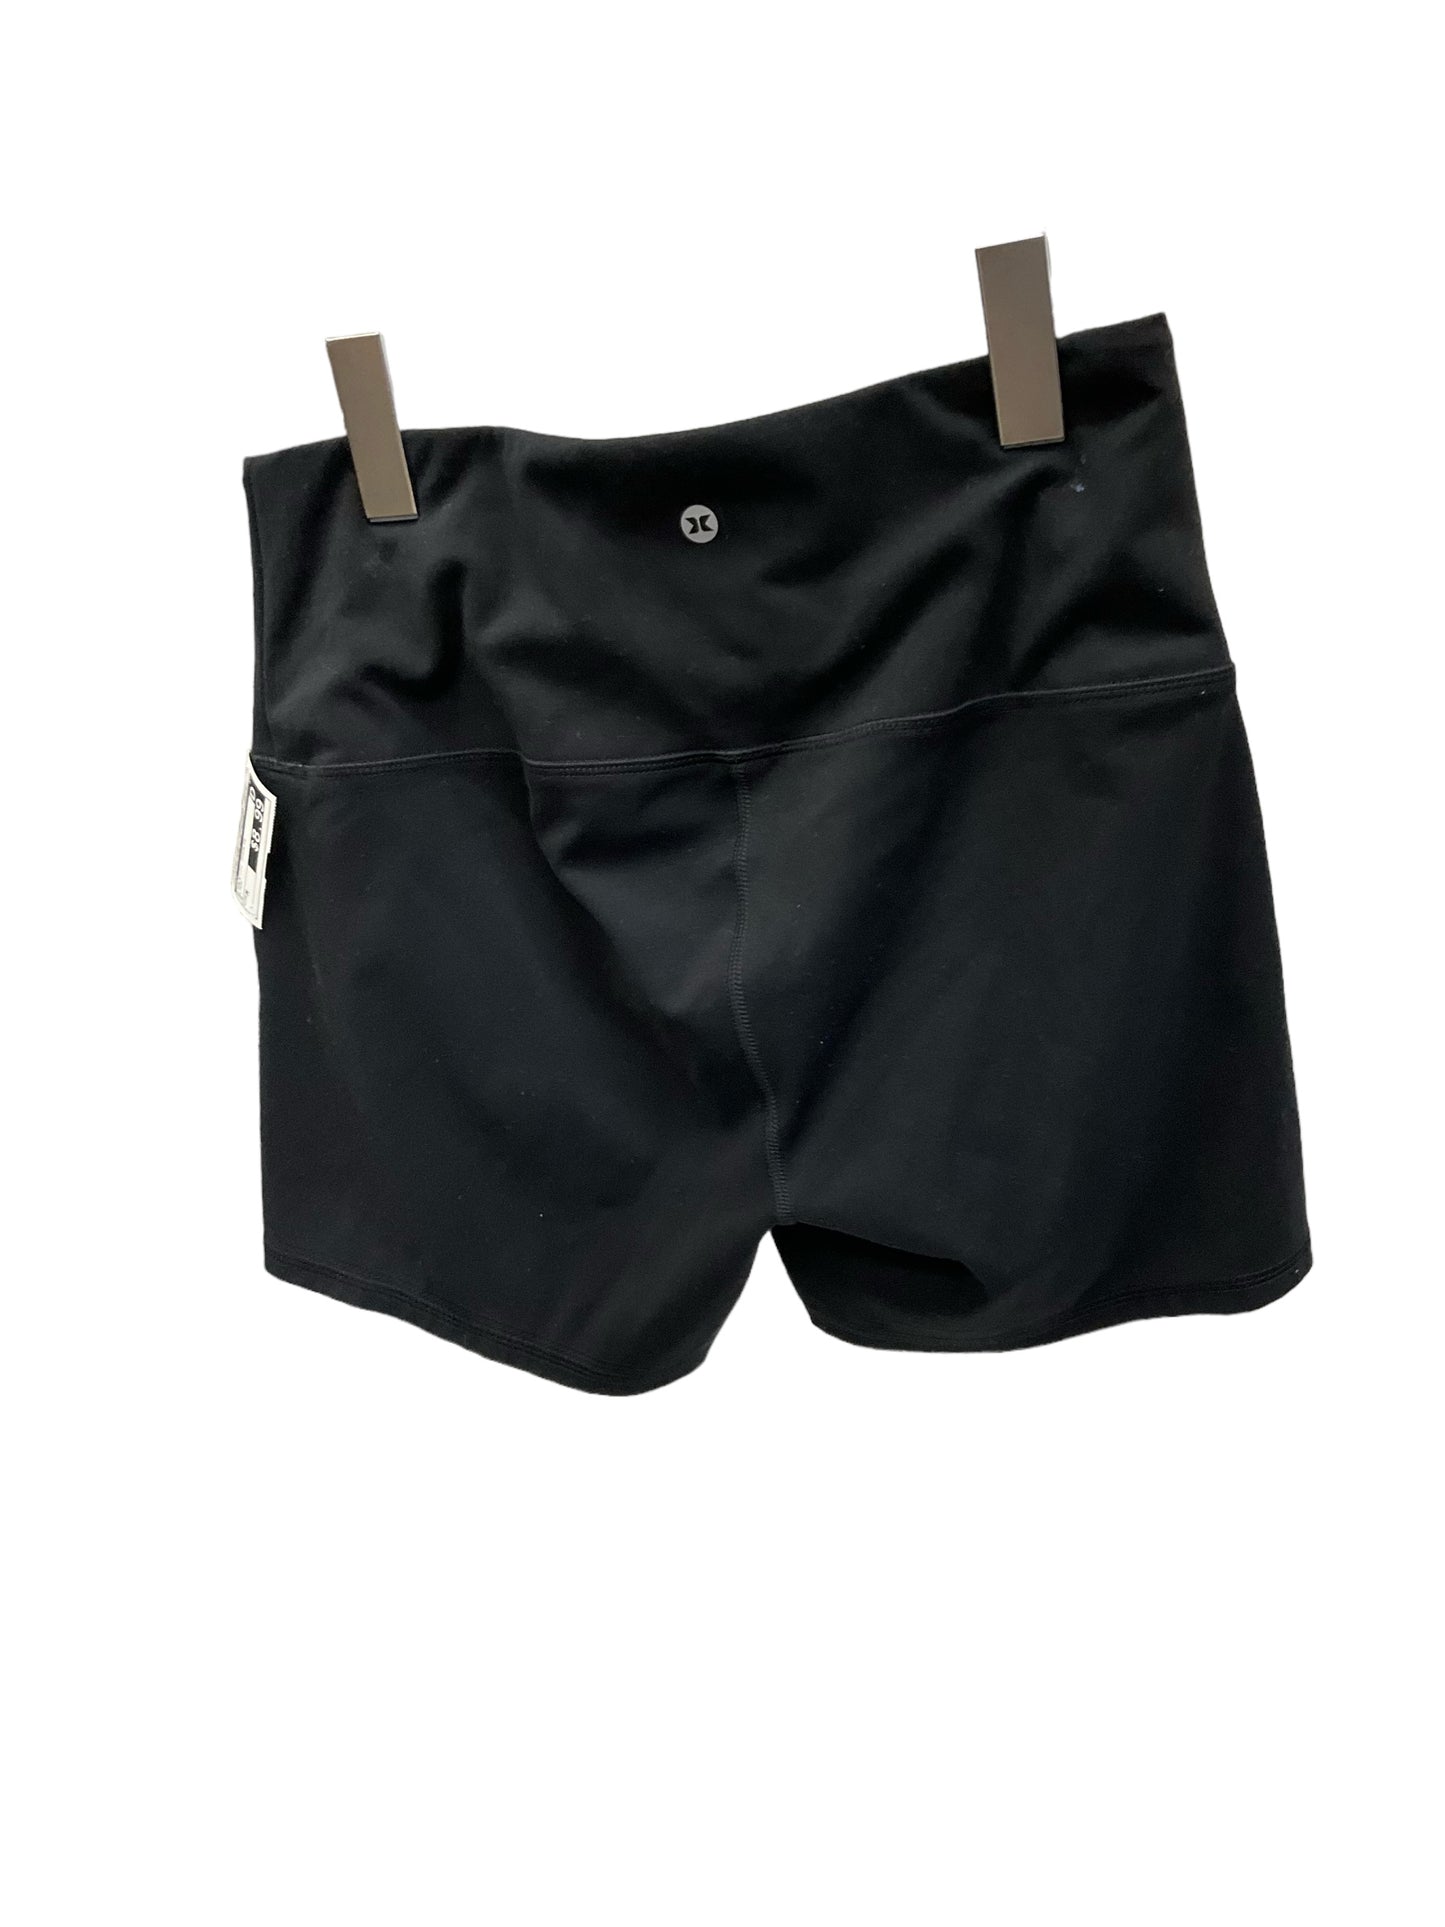 Athletic Shorts By Rbx  Size: M